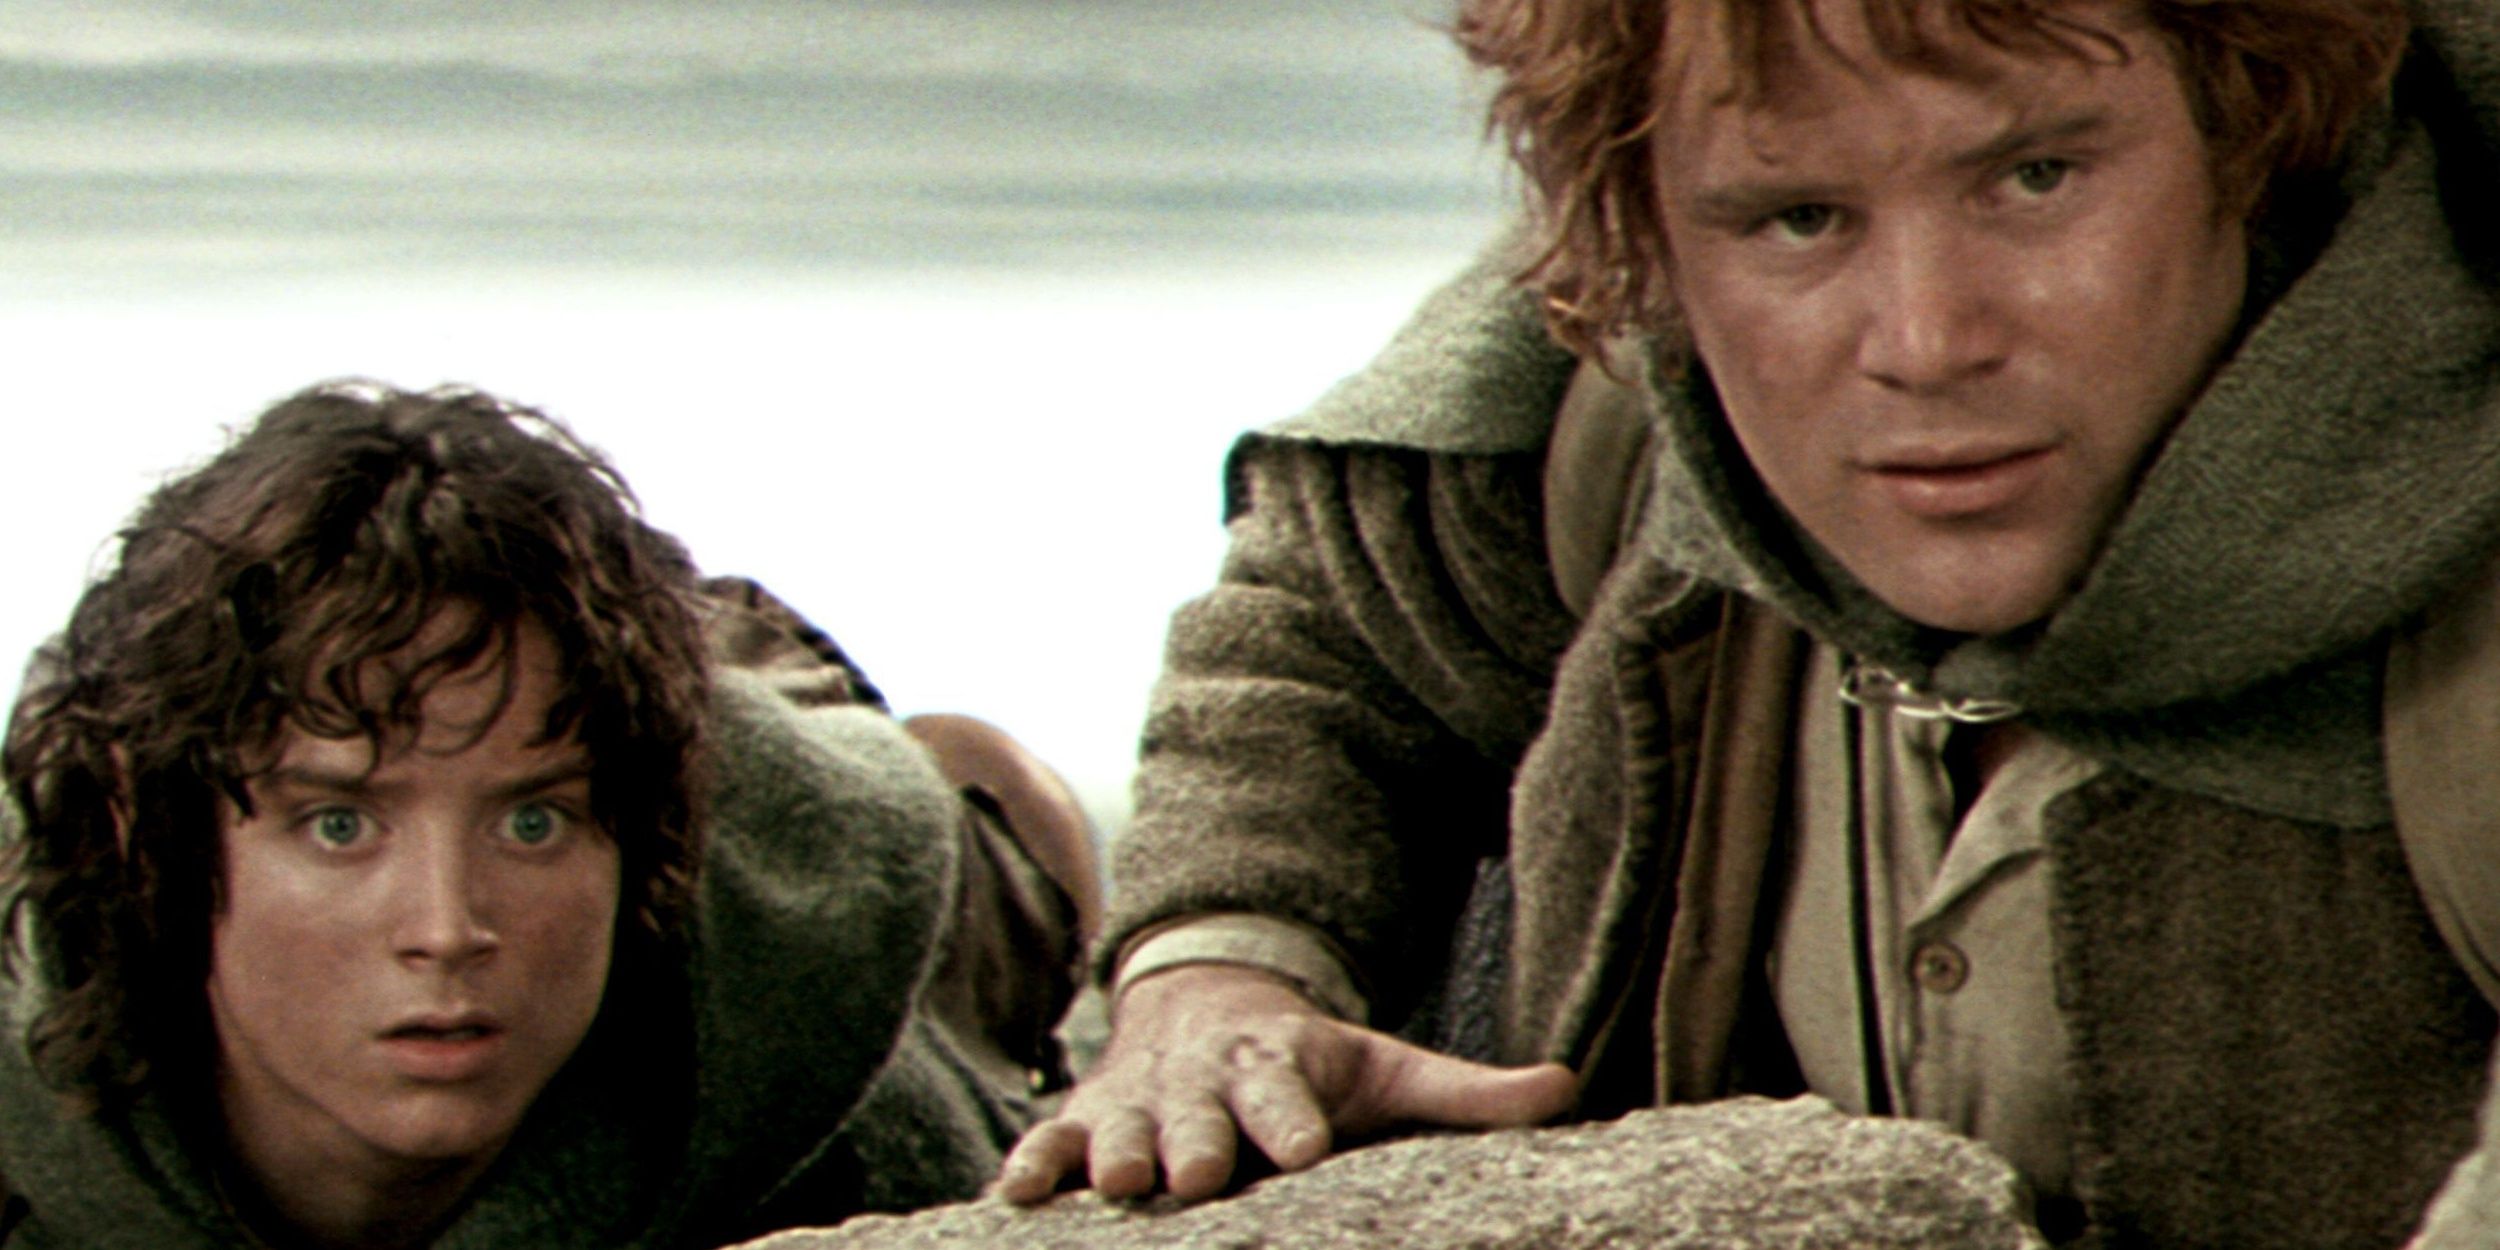 Frodo and Sam looking together from cover